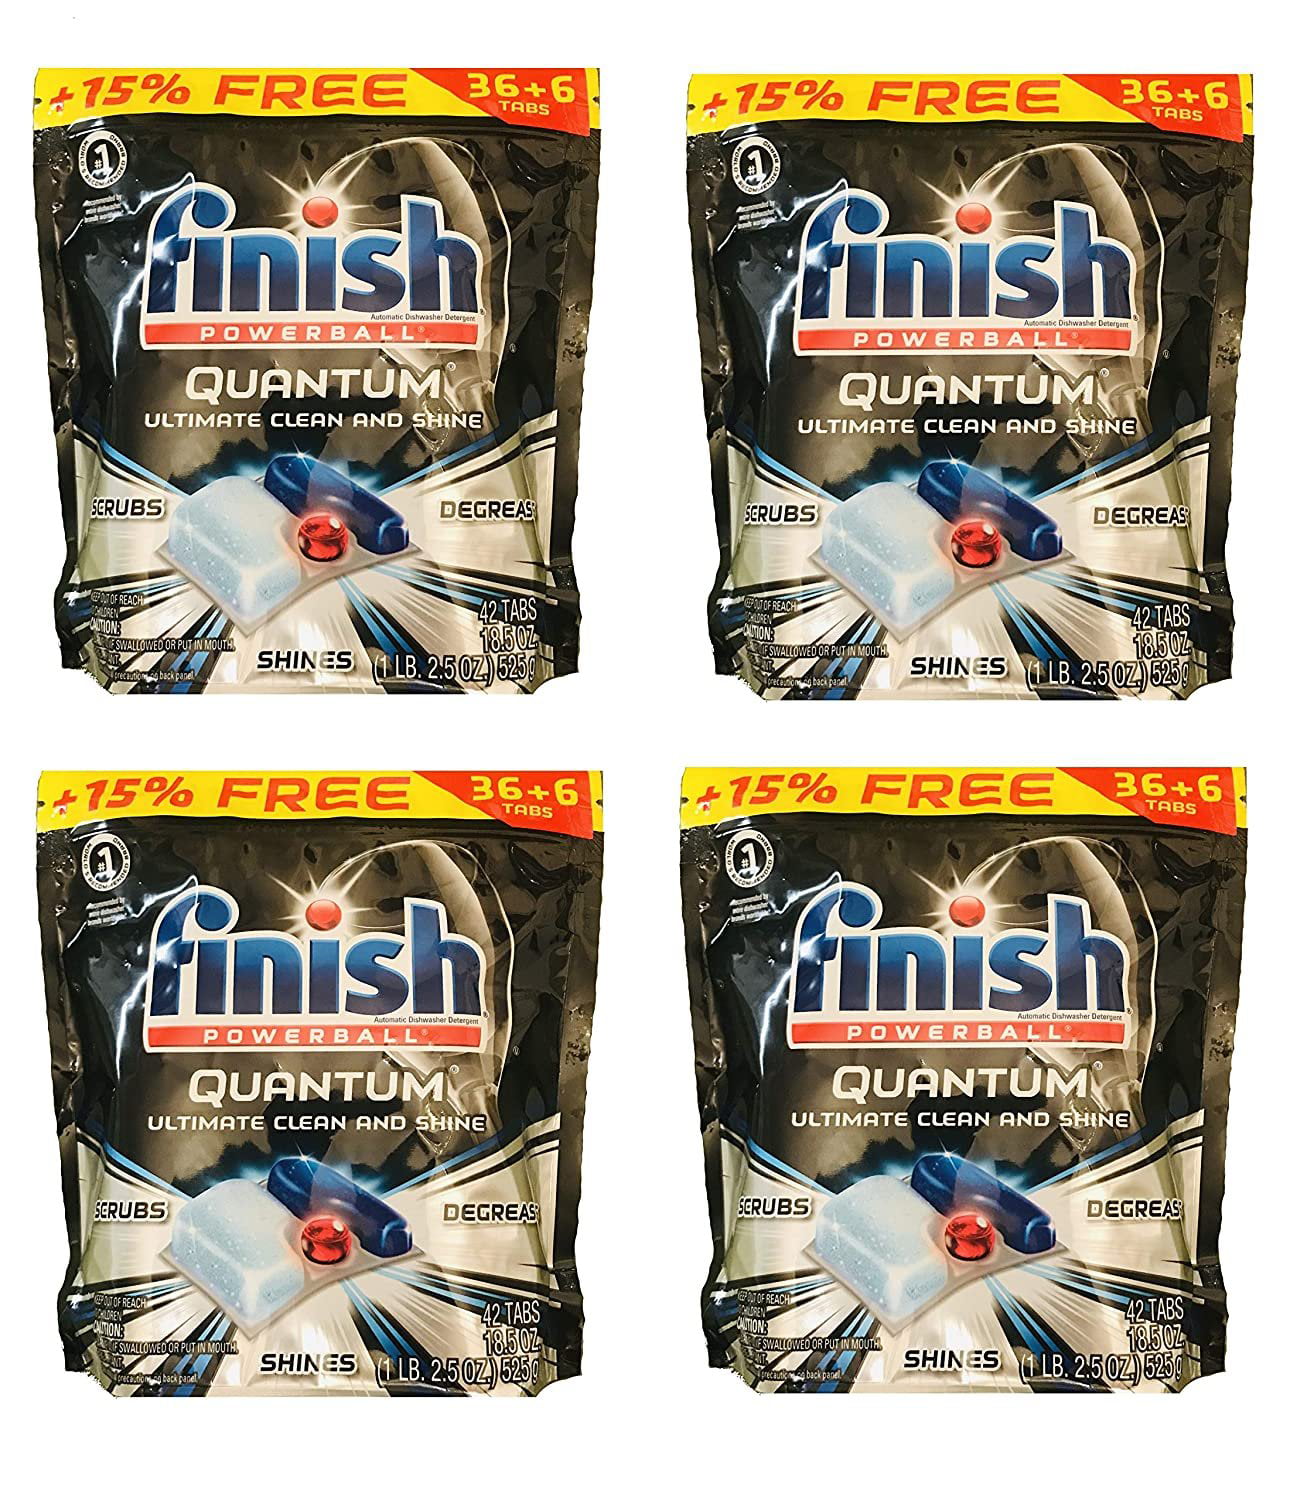 Finish - Finish, Powerball - Dishwasher Detergent, Automatic, Classic, Tabs  (36 count), Shop